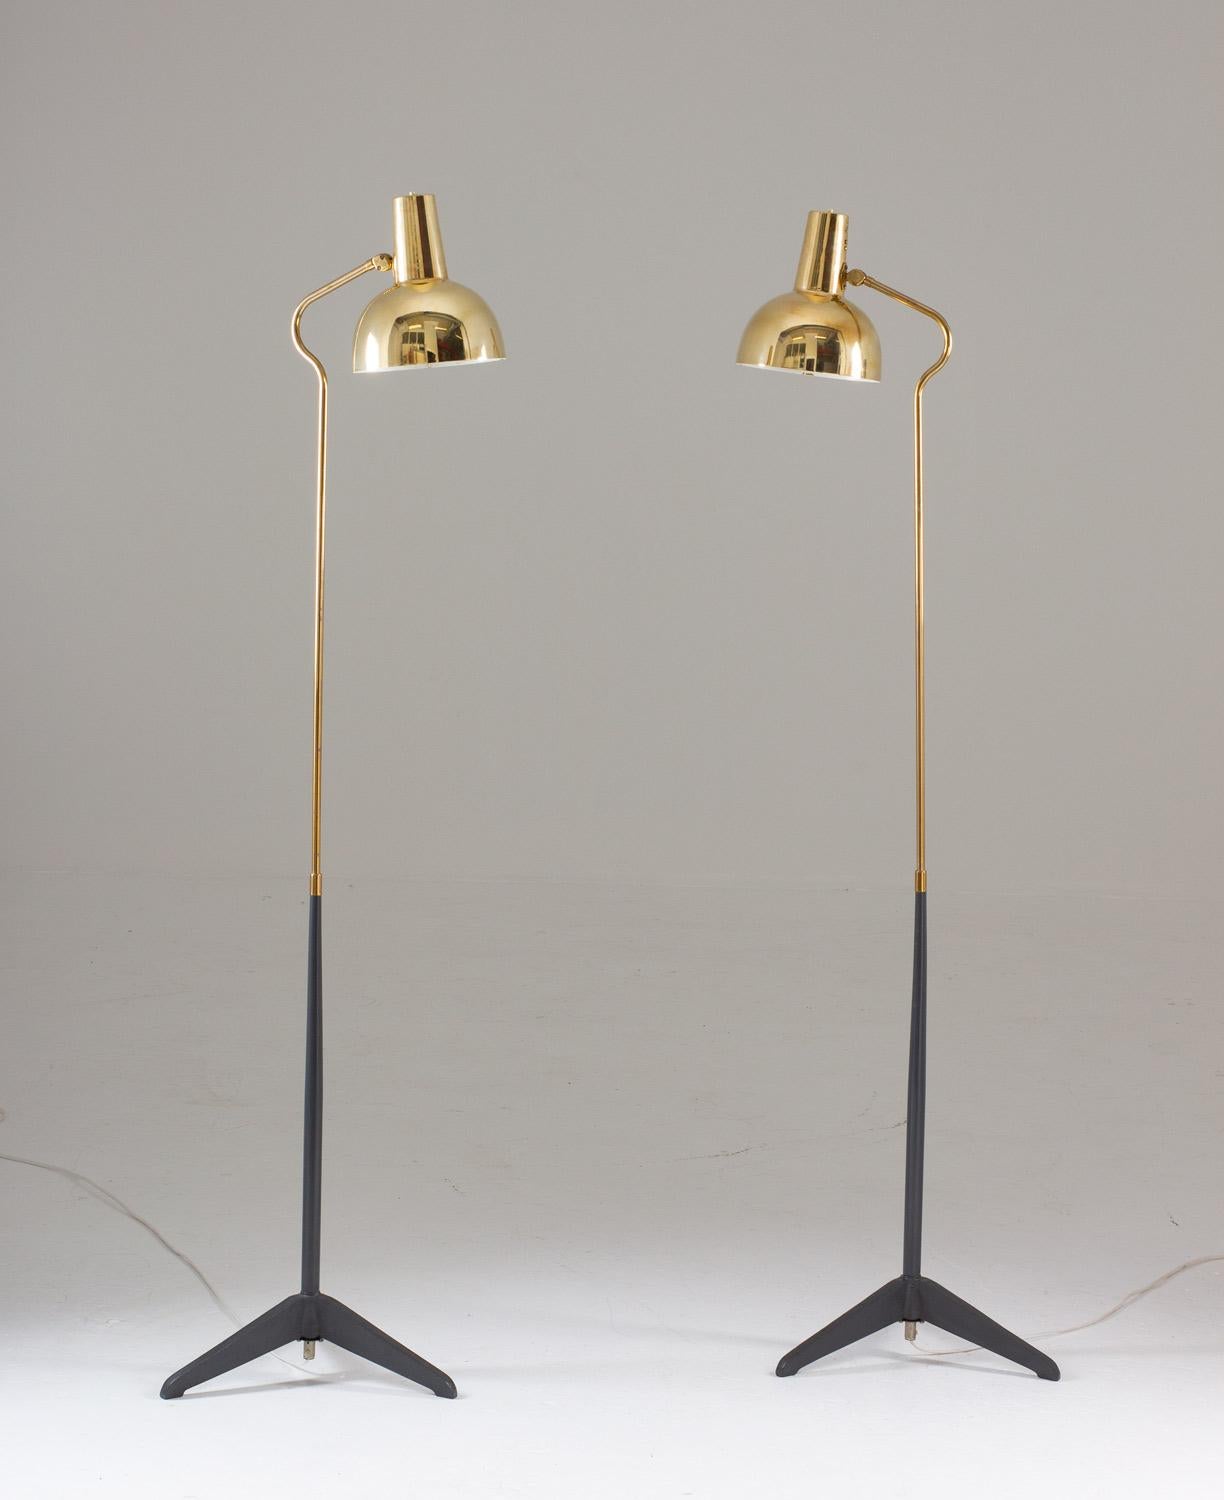 Rare floor lamps, model A 38860, manufactured by ASEA, Sweden, 1960s.
Beautiful floor lamps in brass with grey tripod bases made of iron. The grey metal part of the rod is coated in plastic.
Fits E-27 60w bulbs.

Condition: Very good.
  